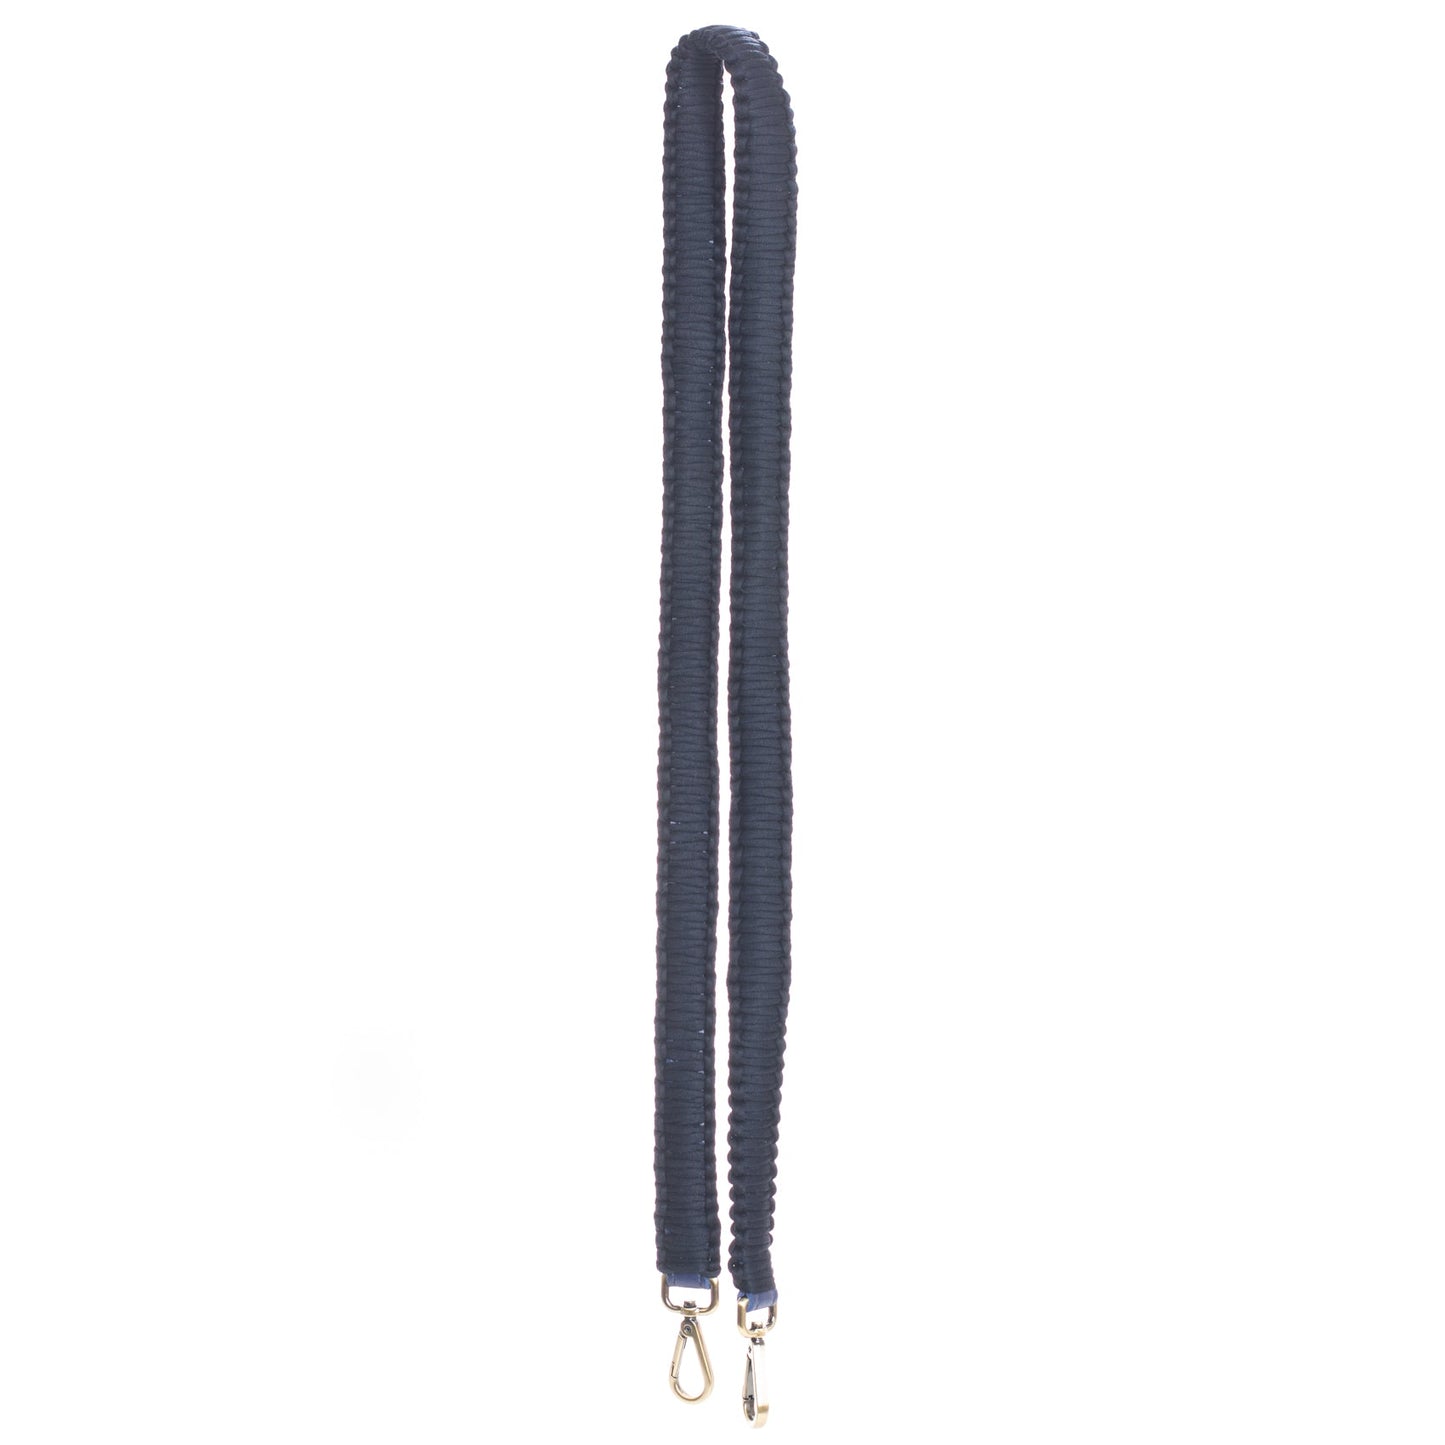 NARRA CROSS BODY BAG STRAP - PHILIPPINES COLLECTION - NAVY